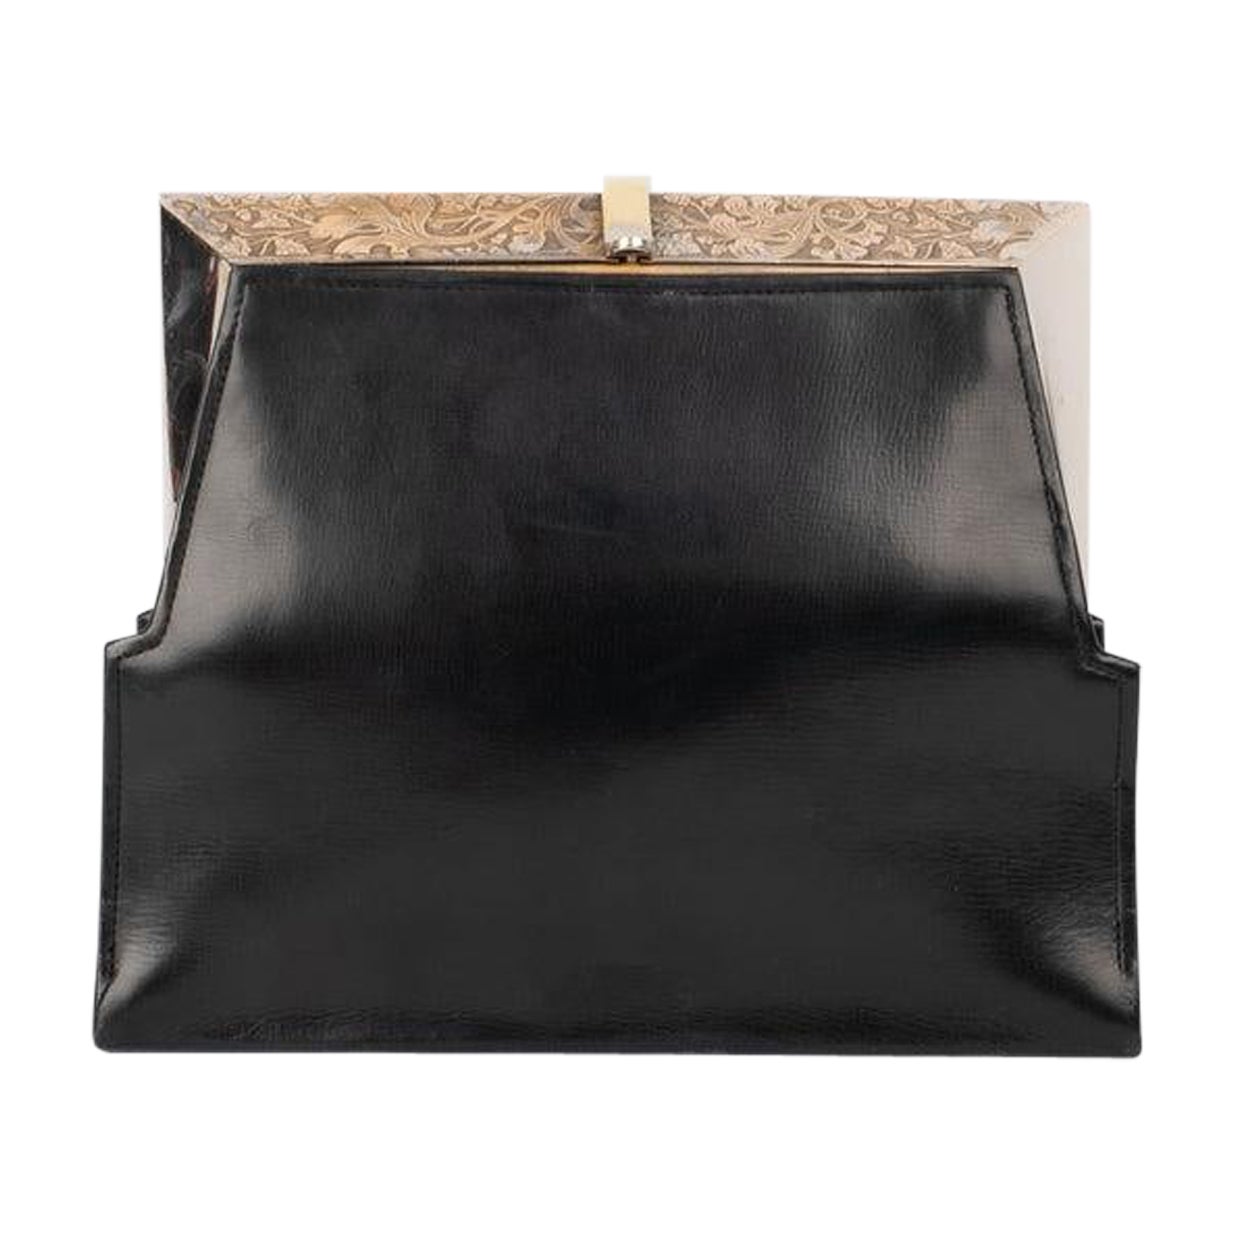 Black Leather Clutch Bag with Engraved Metal For Sale